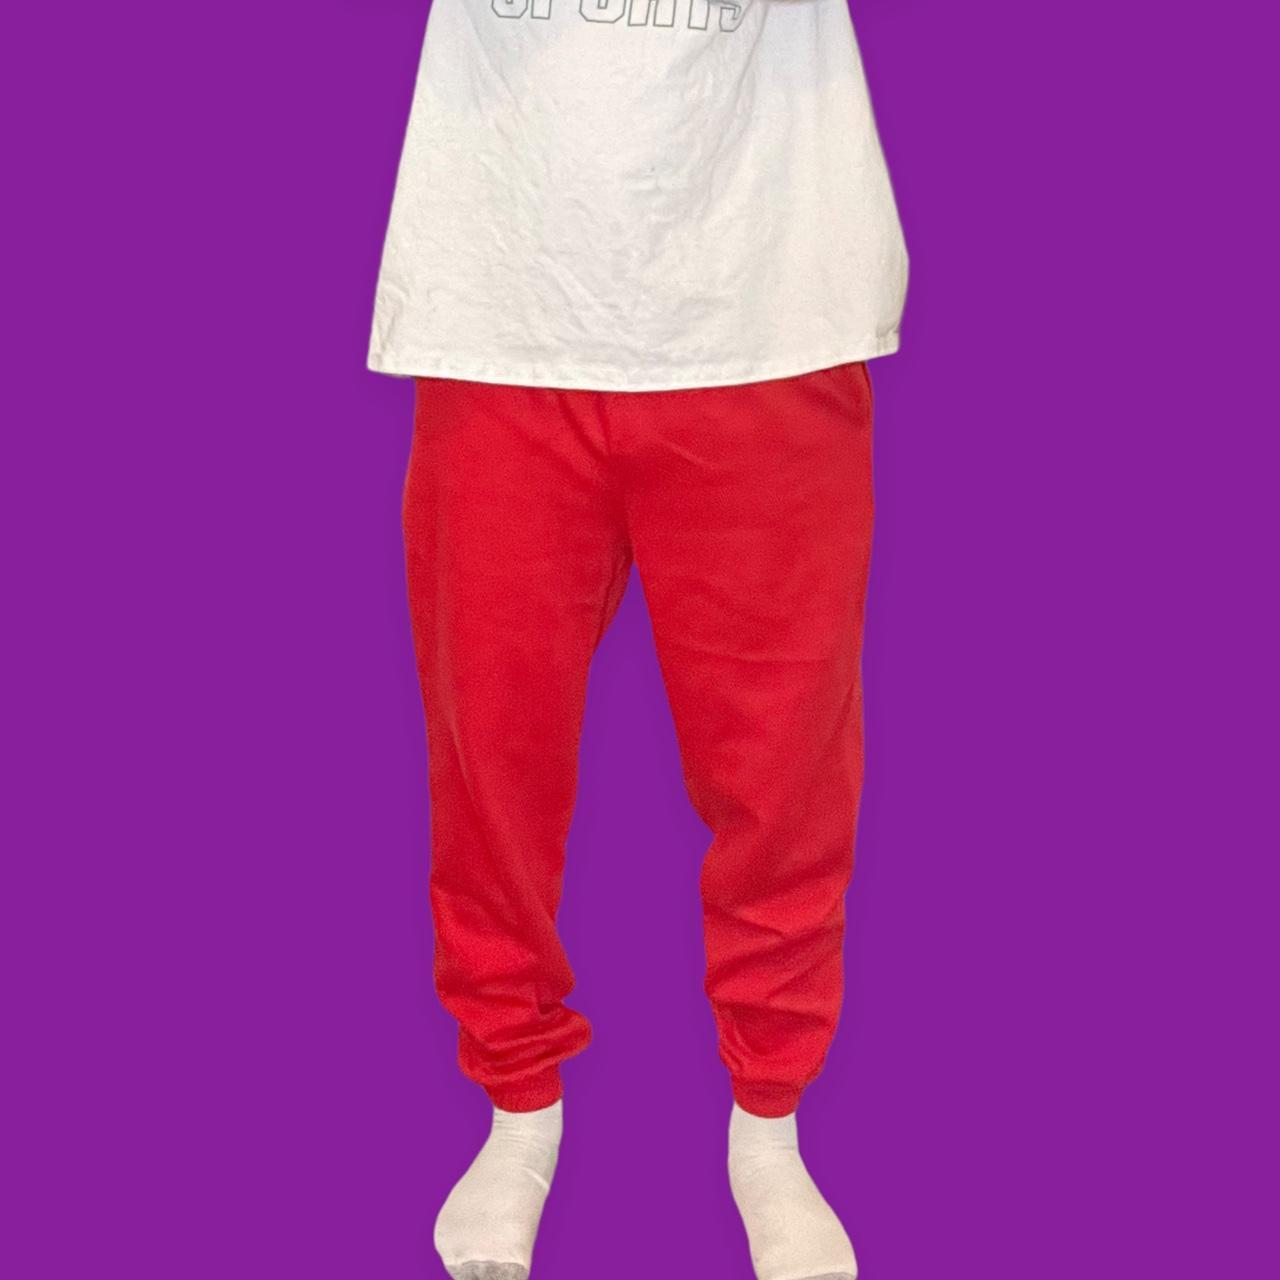 Product Image 1 - Hunt Club sweatpants 

🔴Size: Small